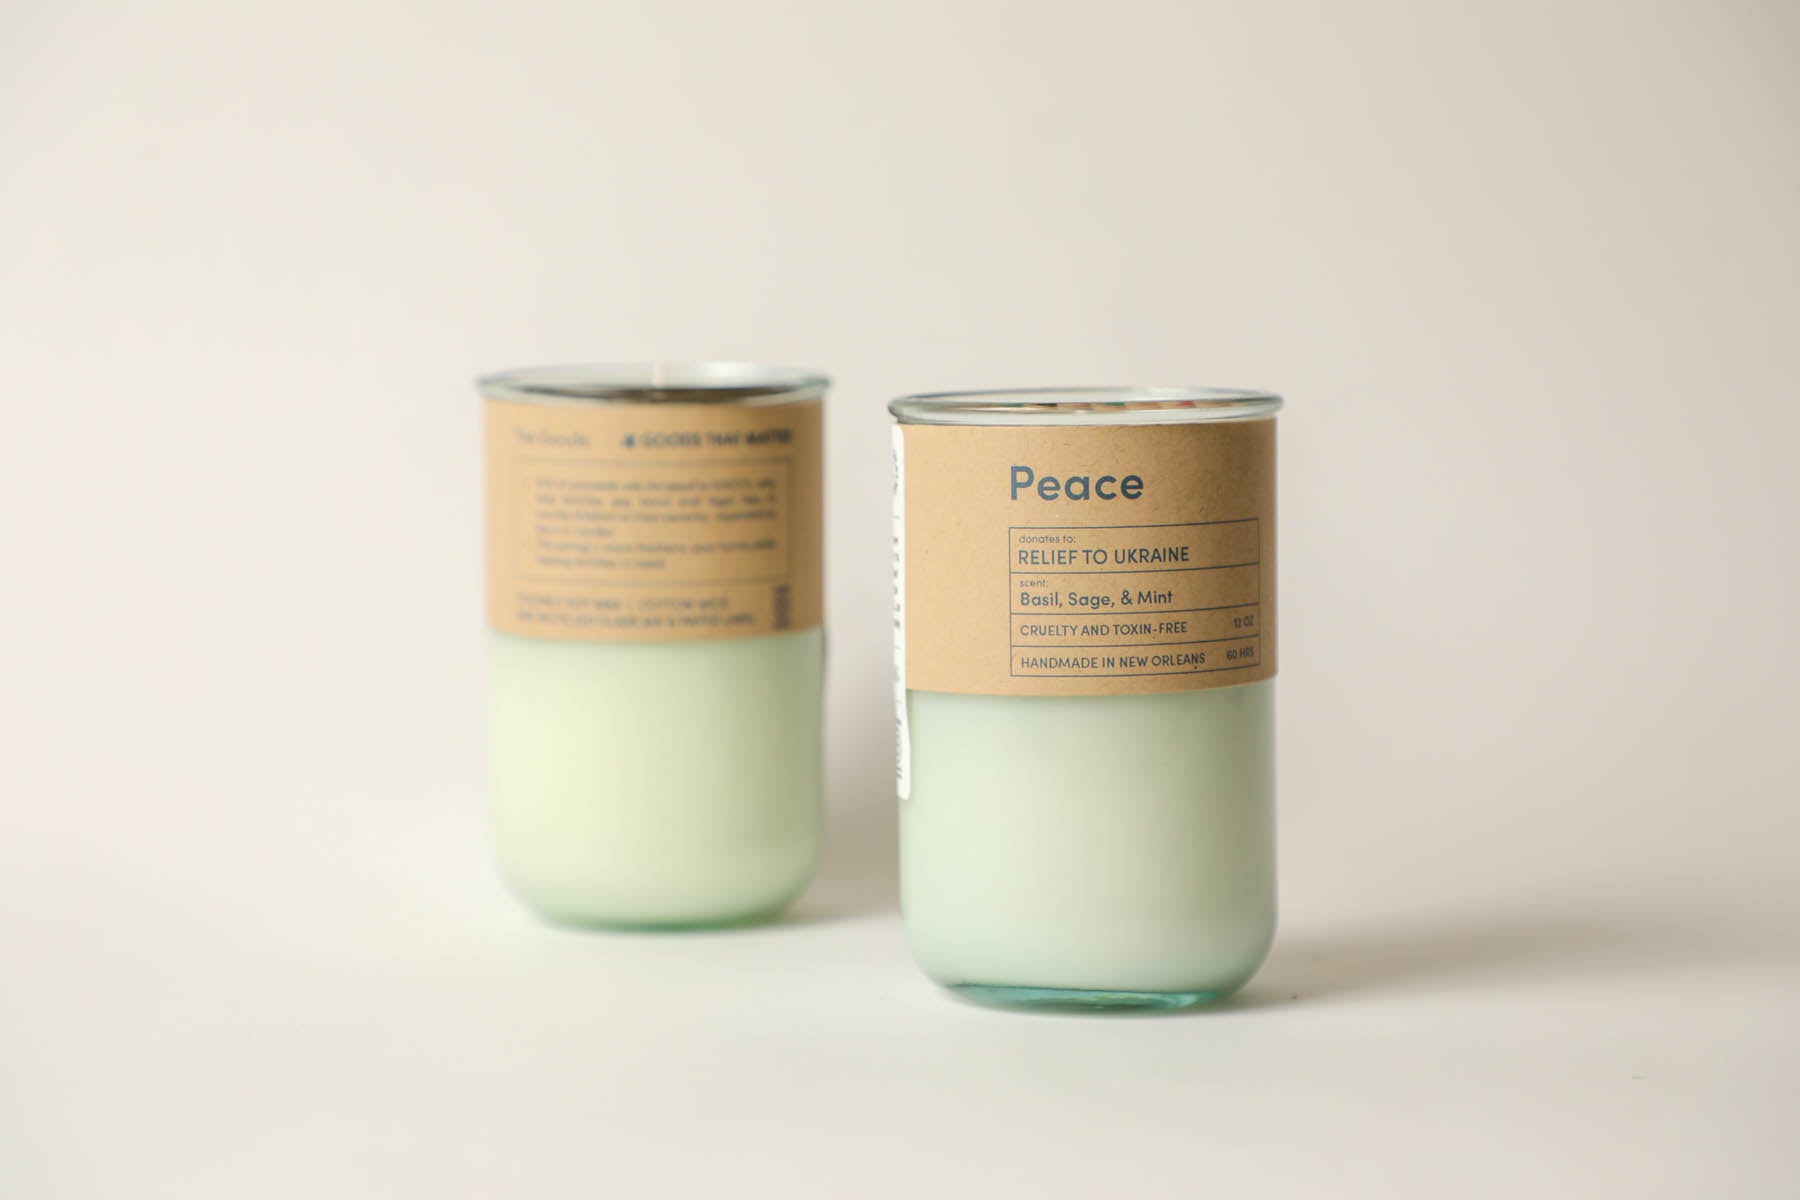 Peace, Relief to Ukraine / Ginger Verbena Scent: Candles for Good